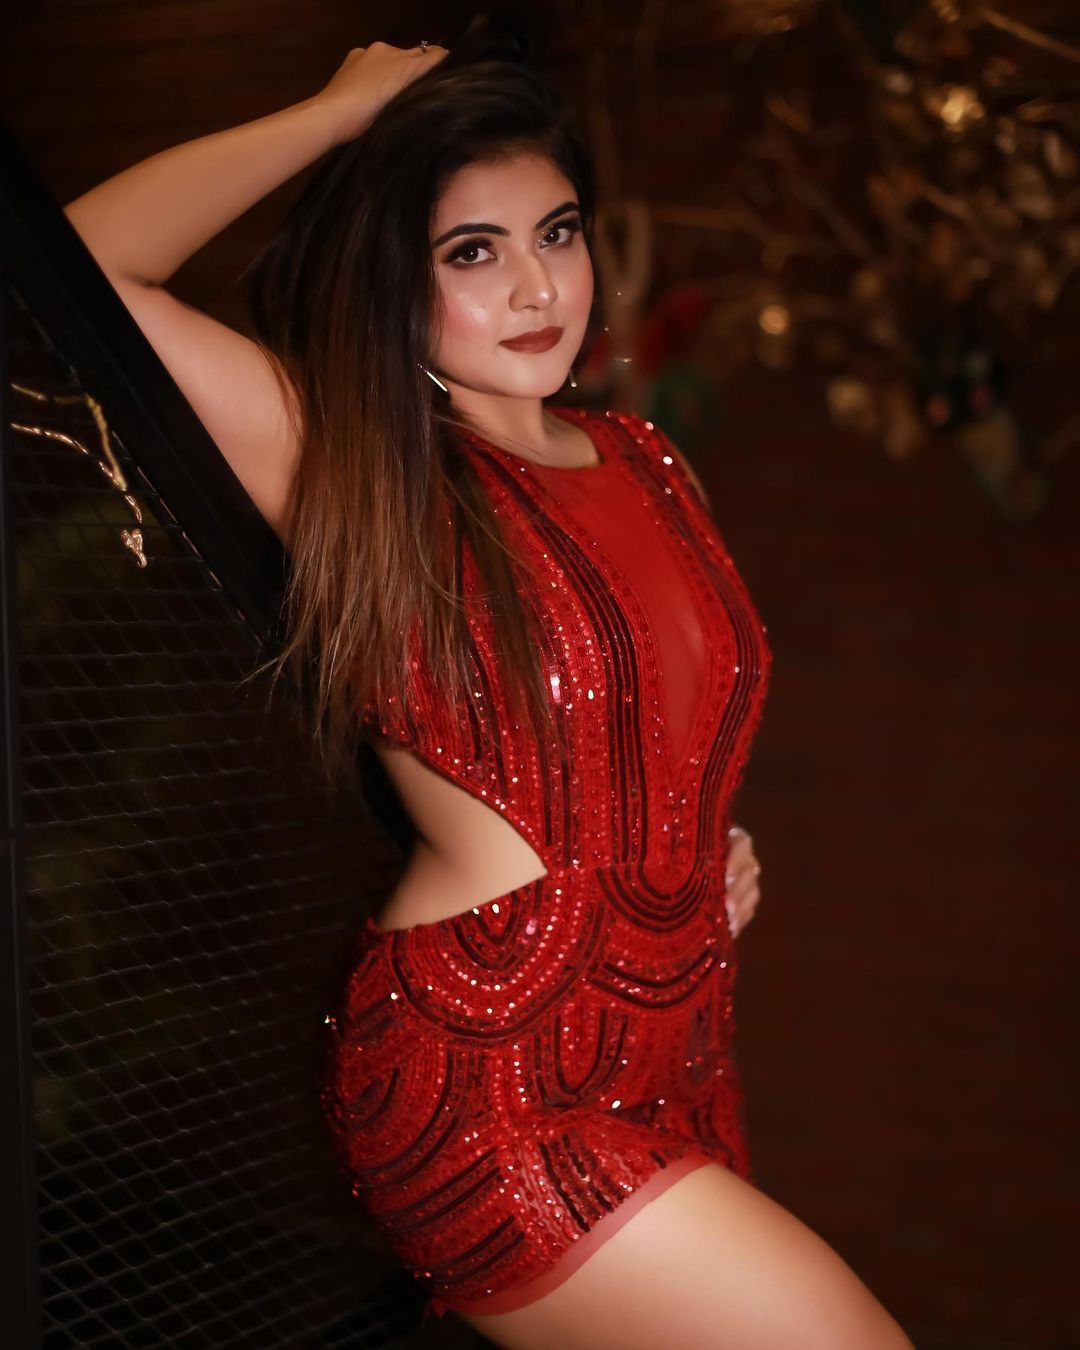 Twinkle Sharma wears a Red Outfit Designed by Ashfaque Ahmad for the photoshoot, December 2021